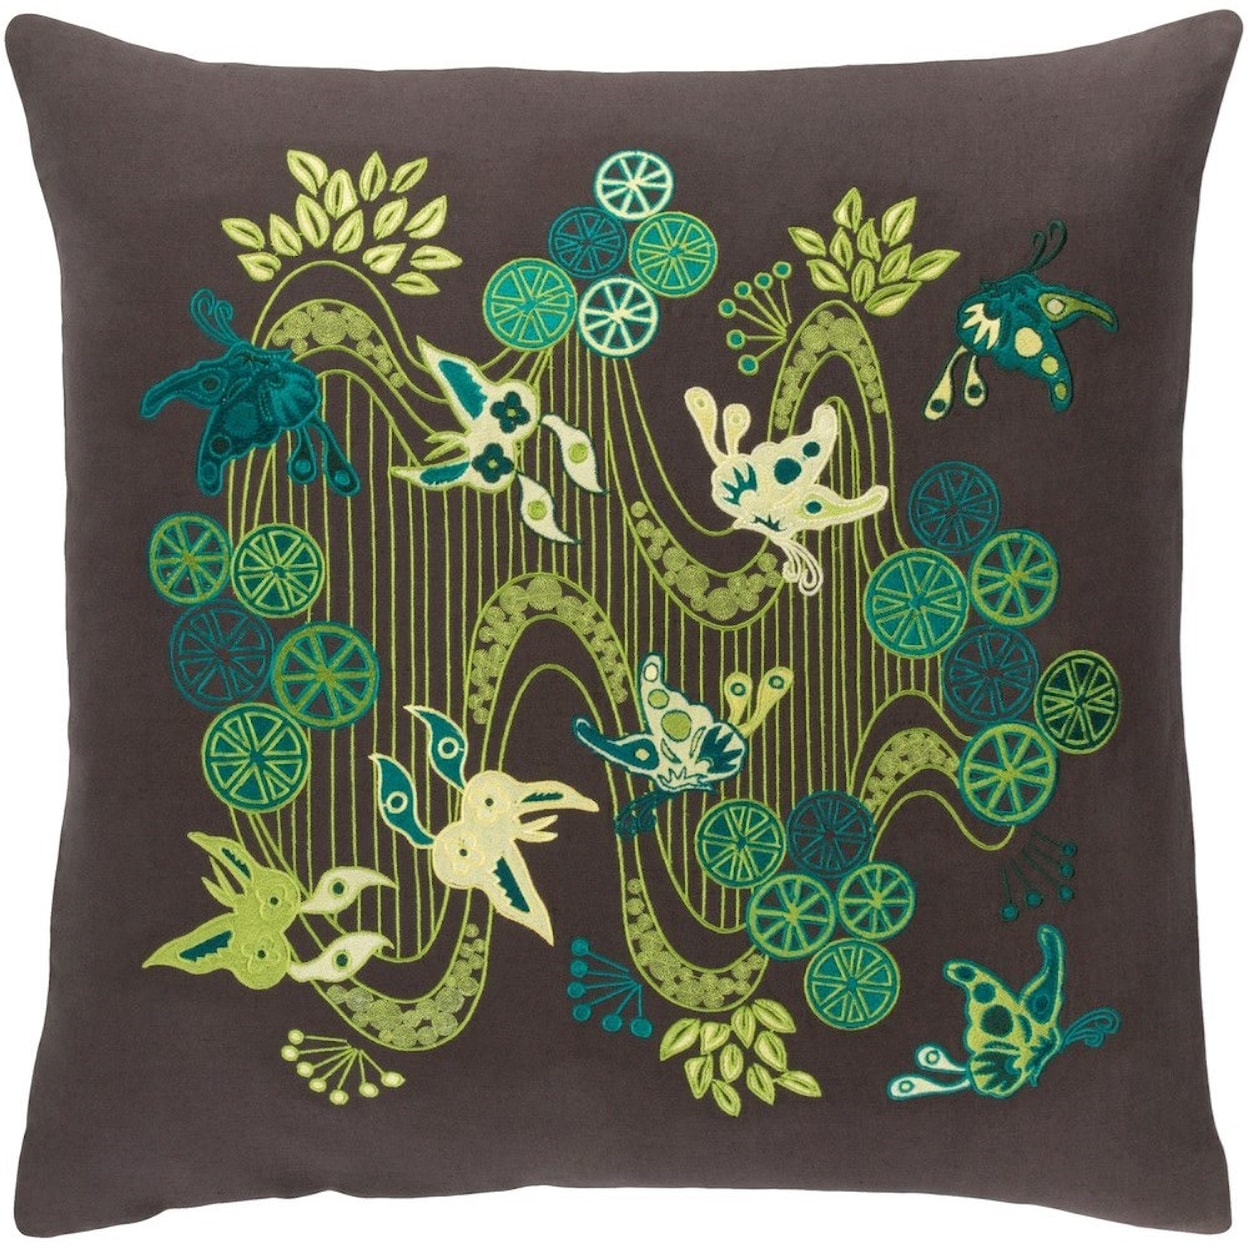 Surya Chinese River 18 x 18 x 4 Polyester Throw Pillow